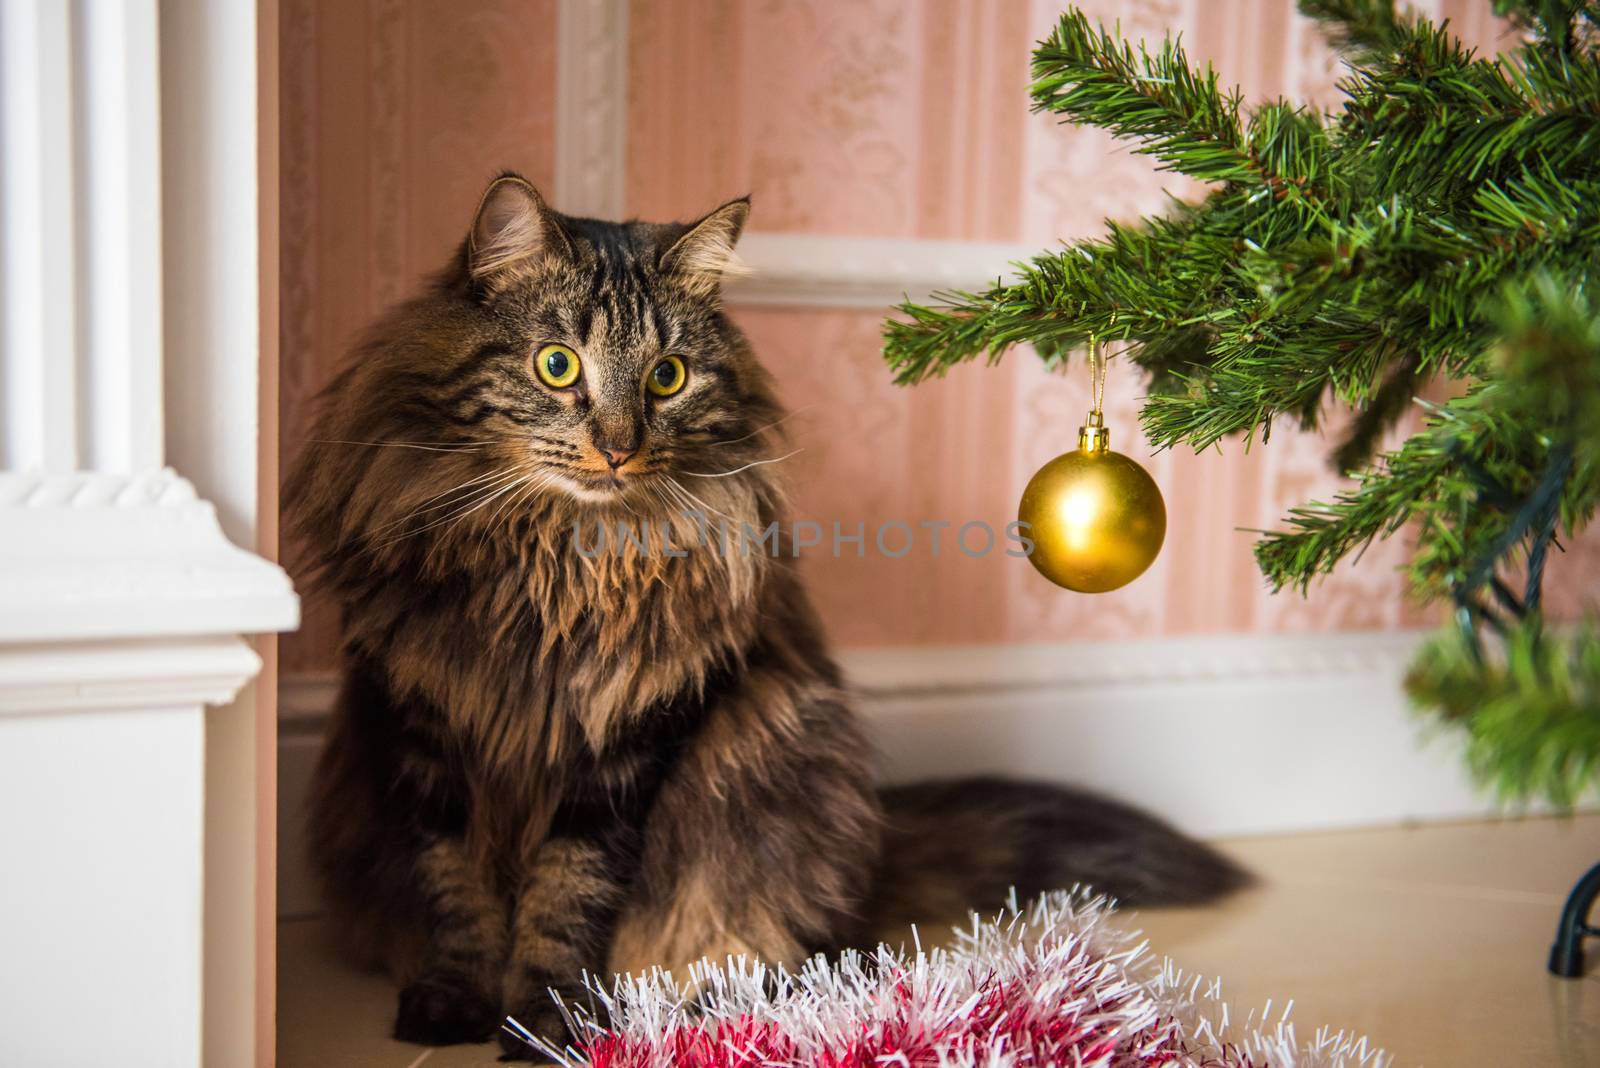 Funny Norwegian cat under Christmas tree on New Year. Cat plays with Christmas tree toys